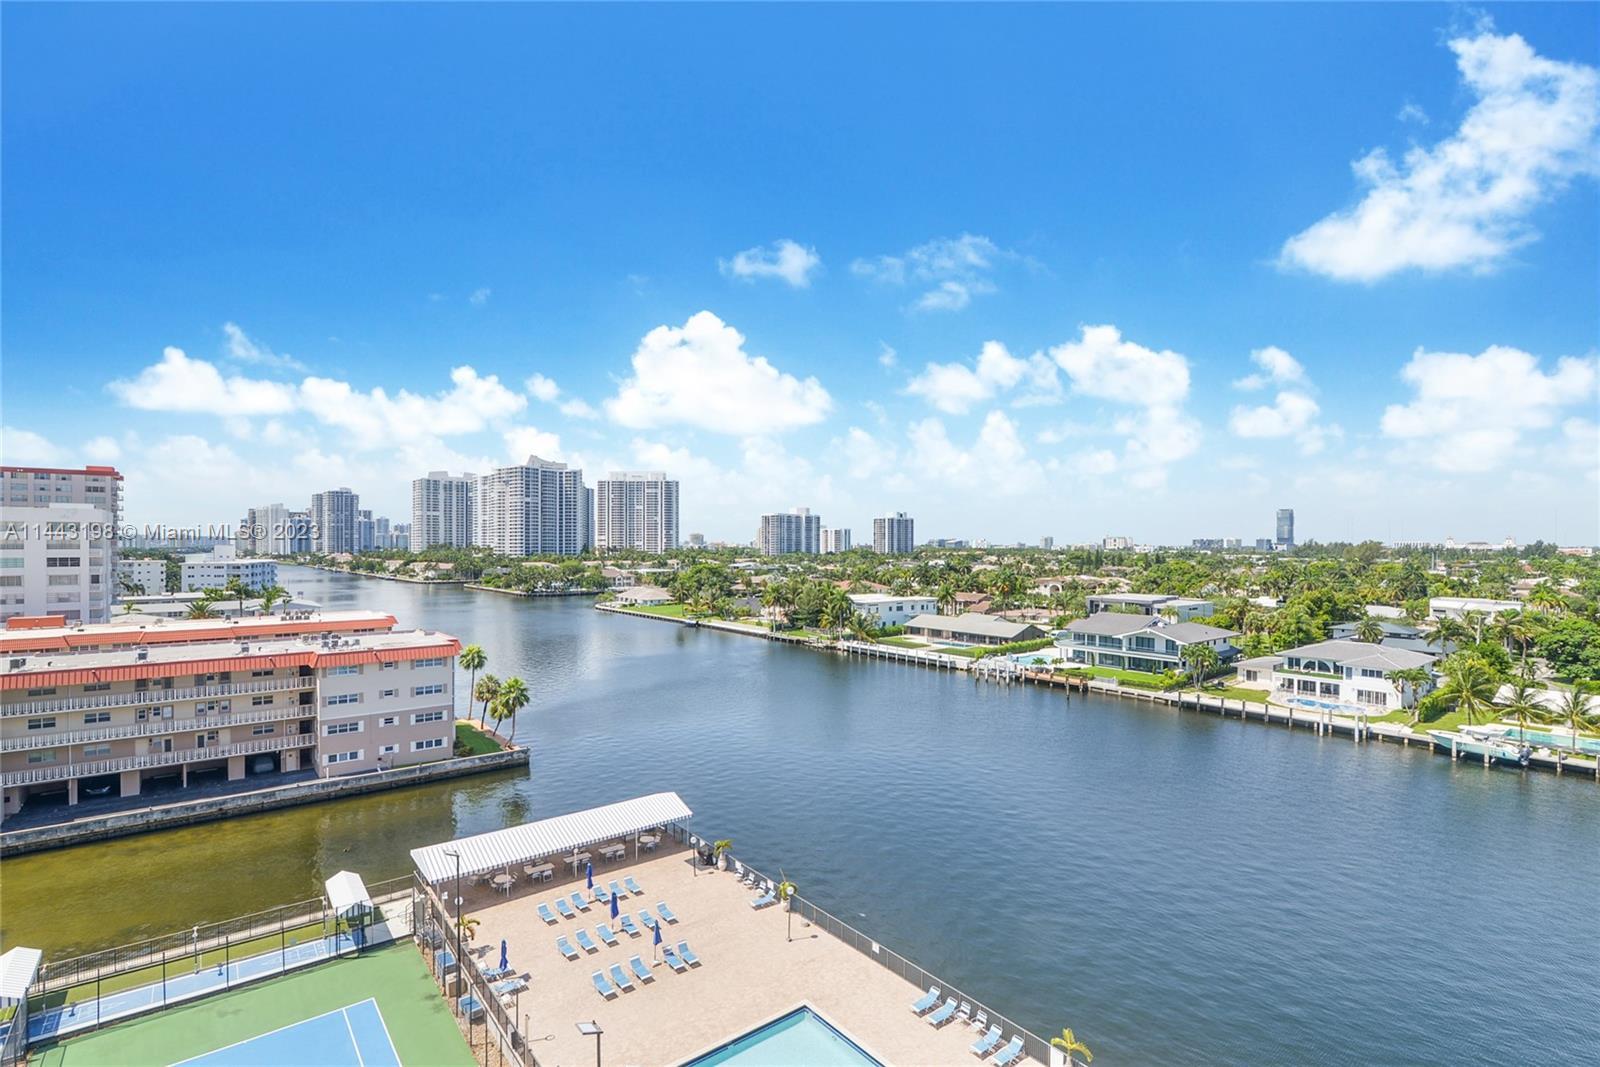 Waterview sunrises and sunsets will give you that Florida lifestyle you're looking for in this moder